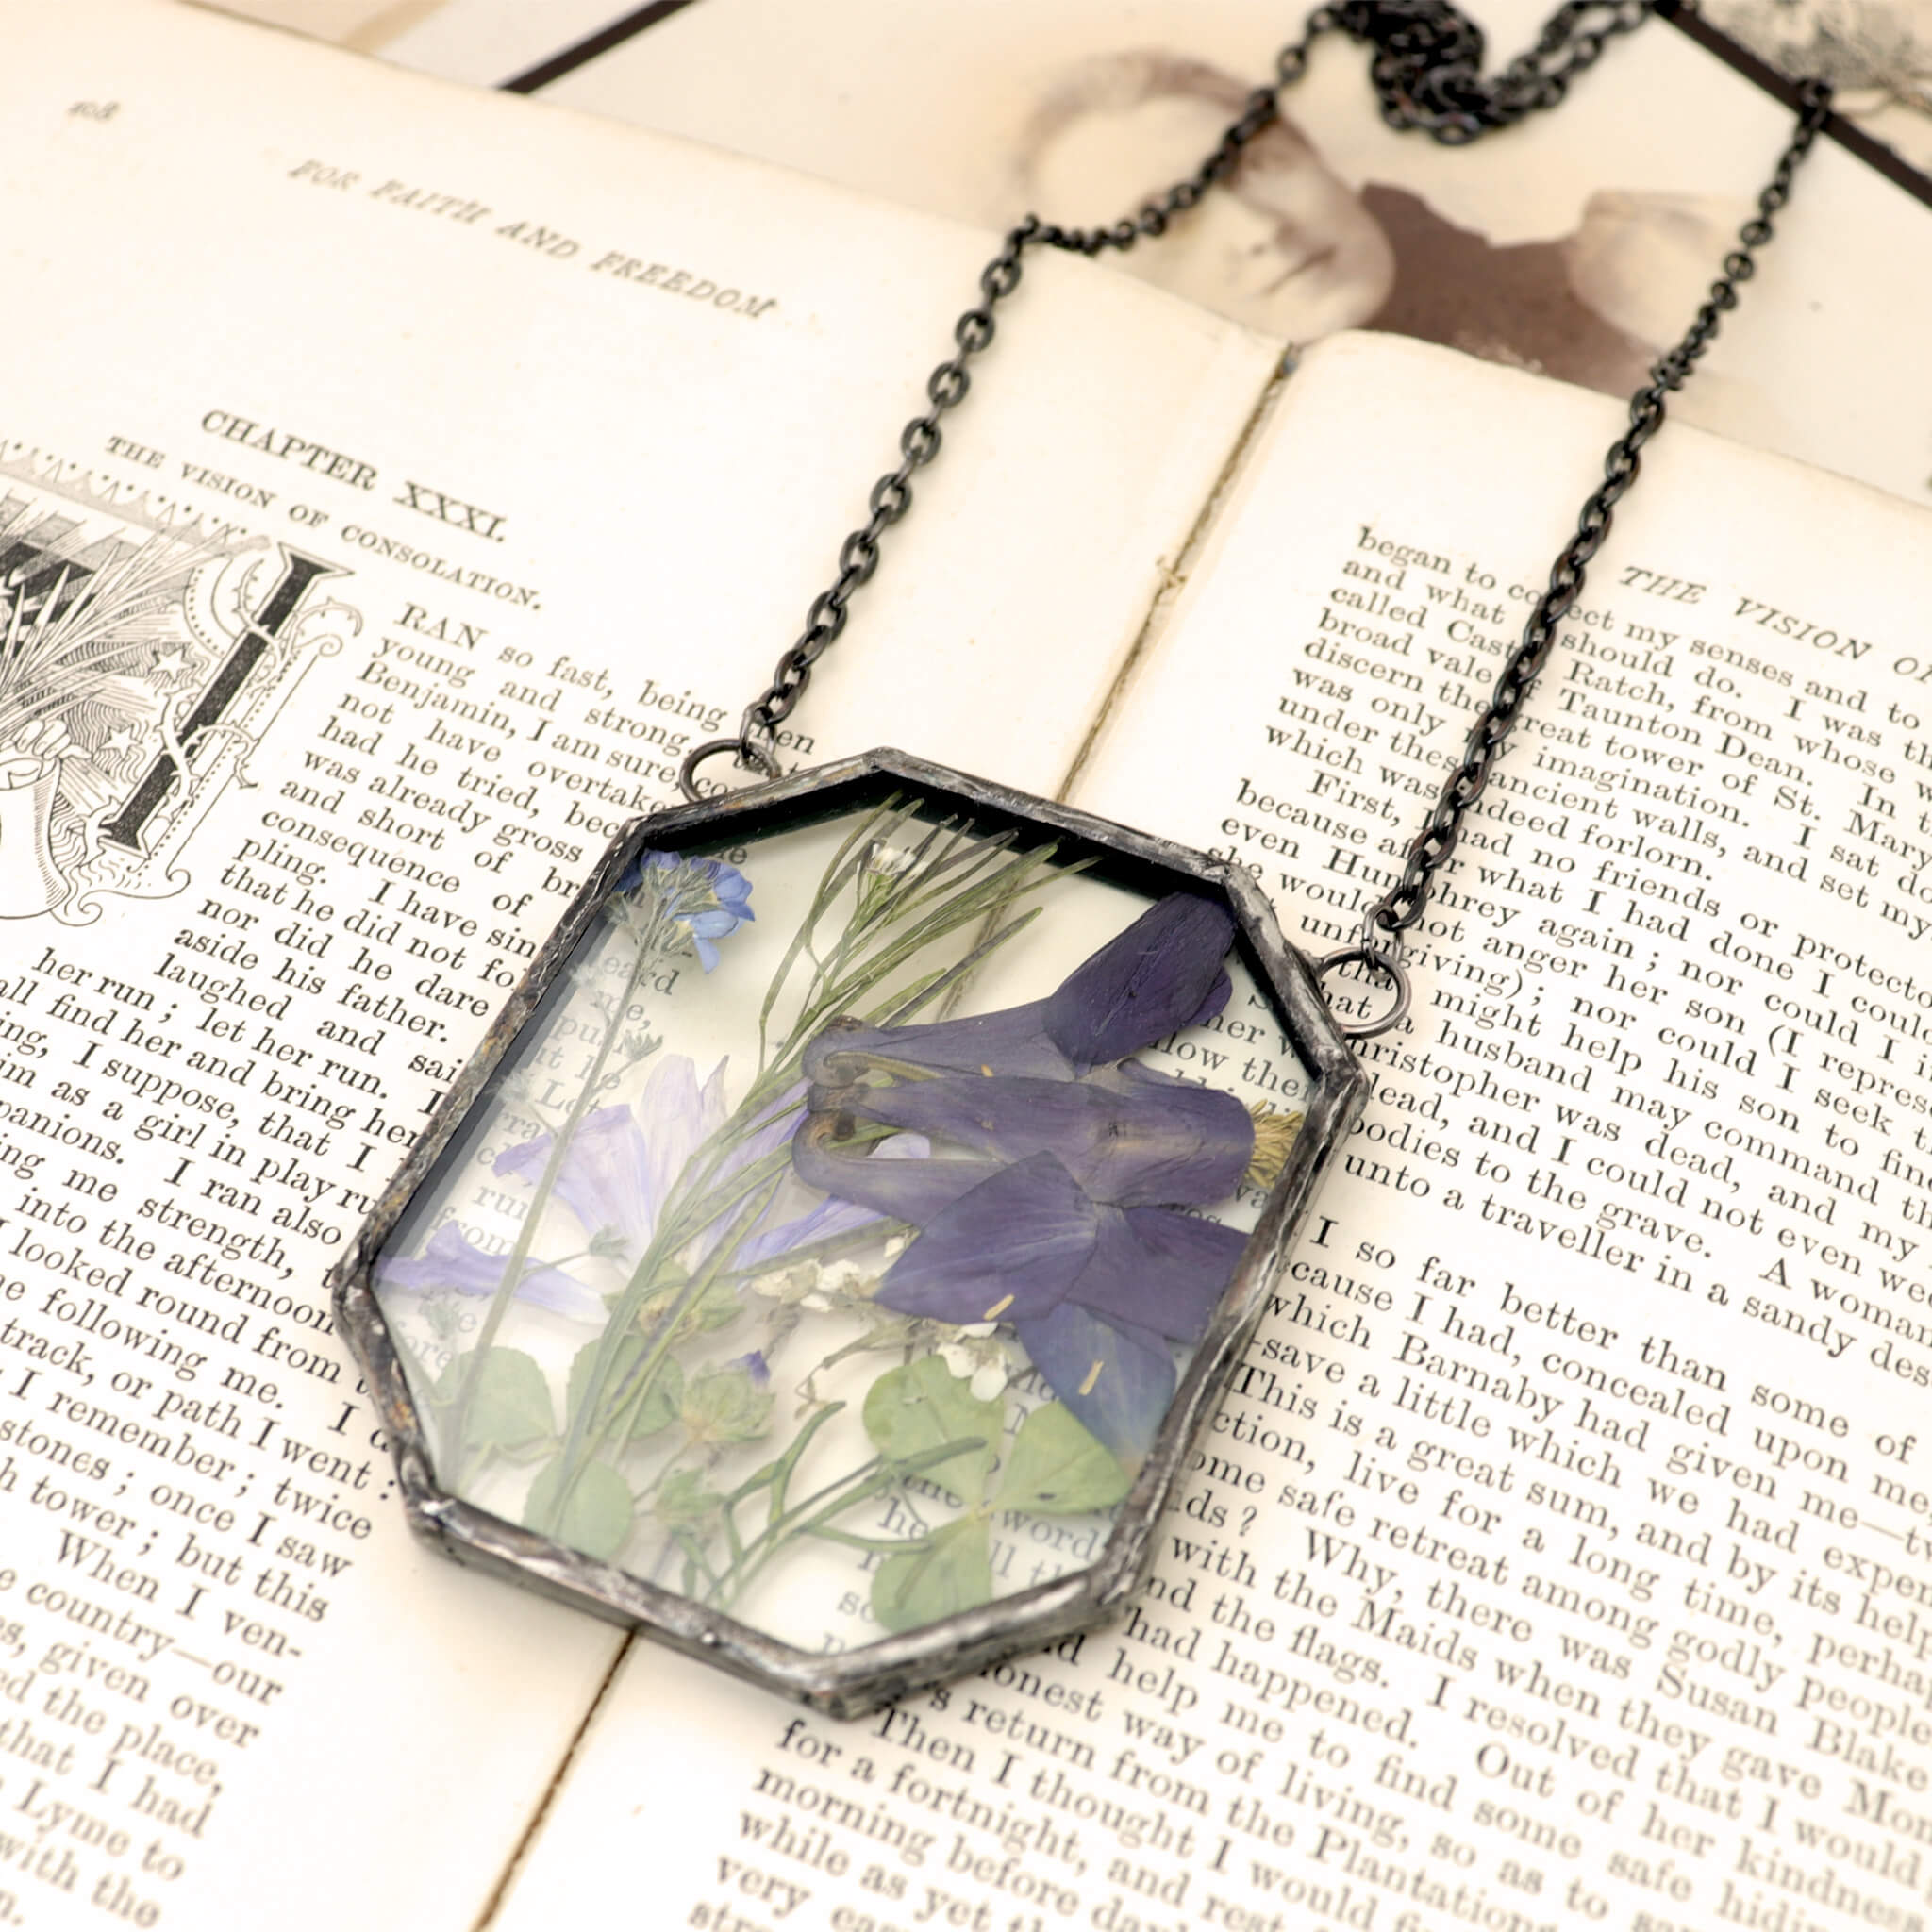 dark indigo flowers and greenery in glass and solder necklace lying on an old book